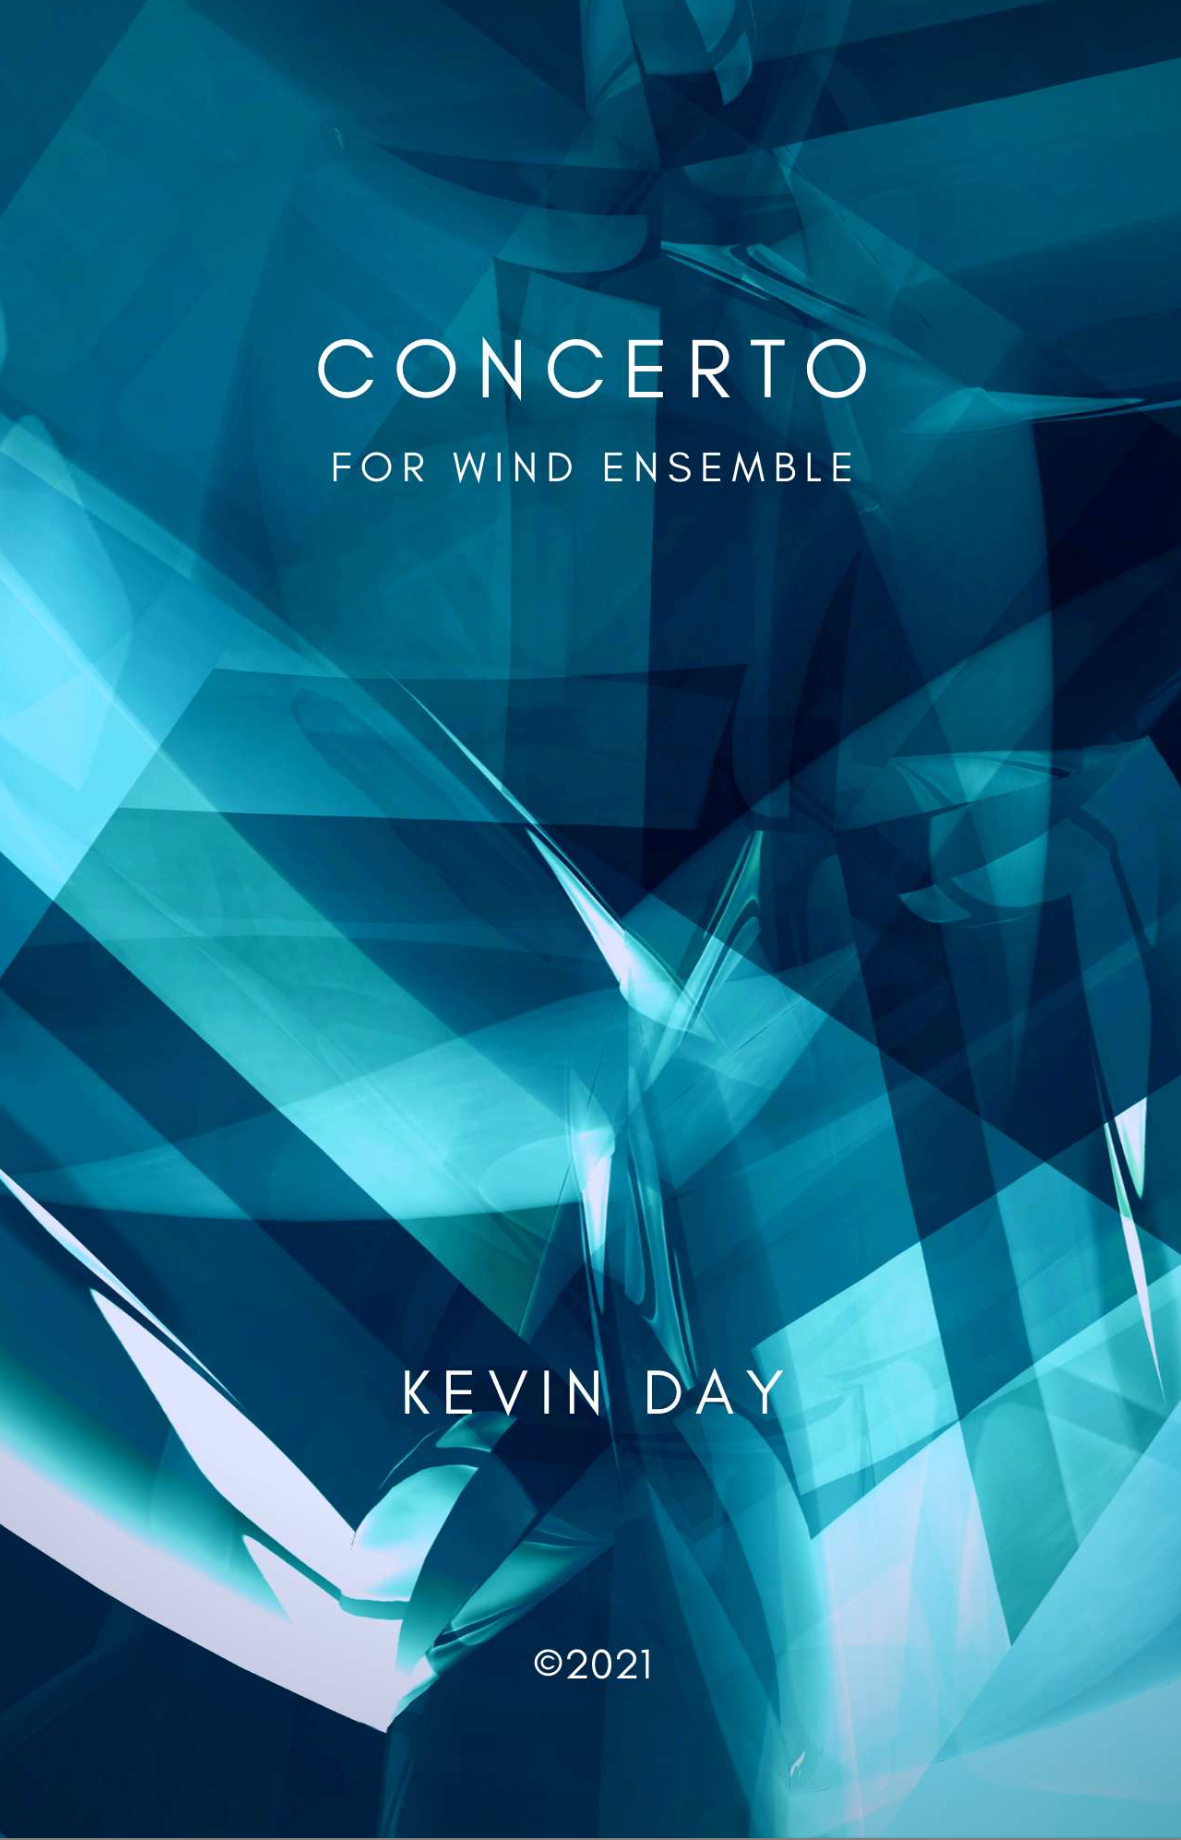 Concerto For Wind Ensemble (Score Only) by Kevin Day